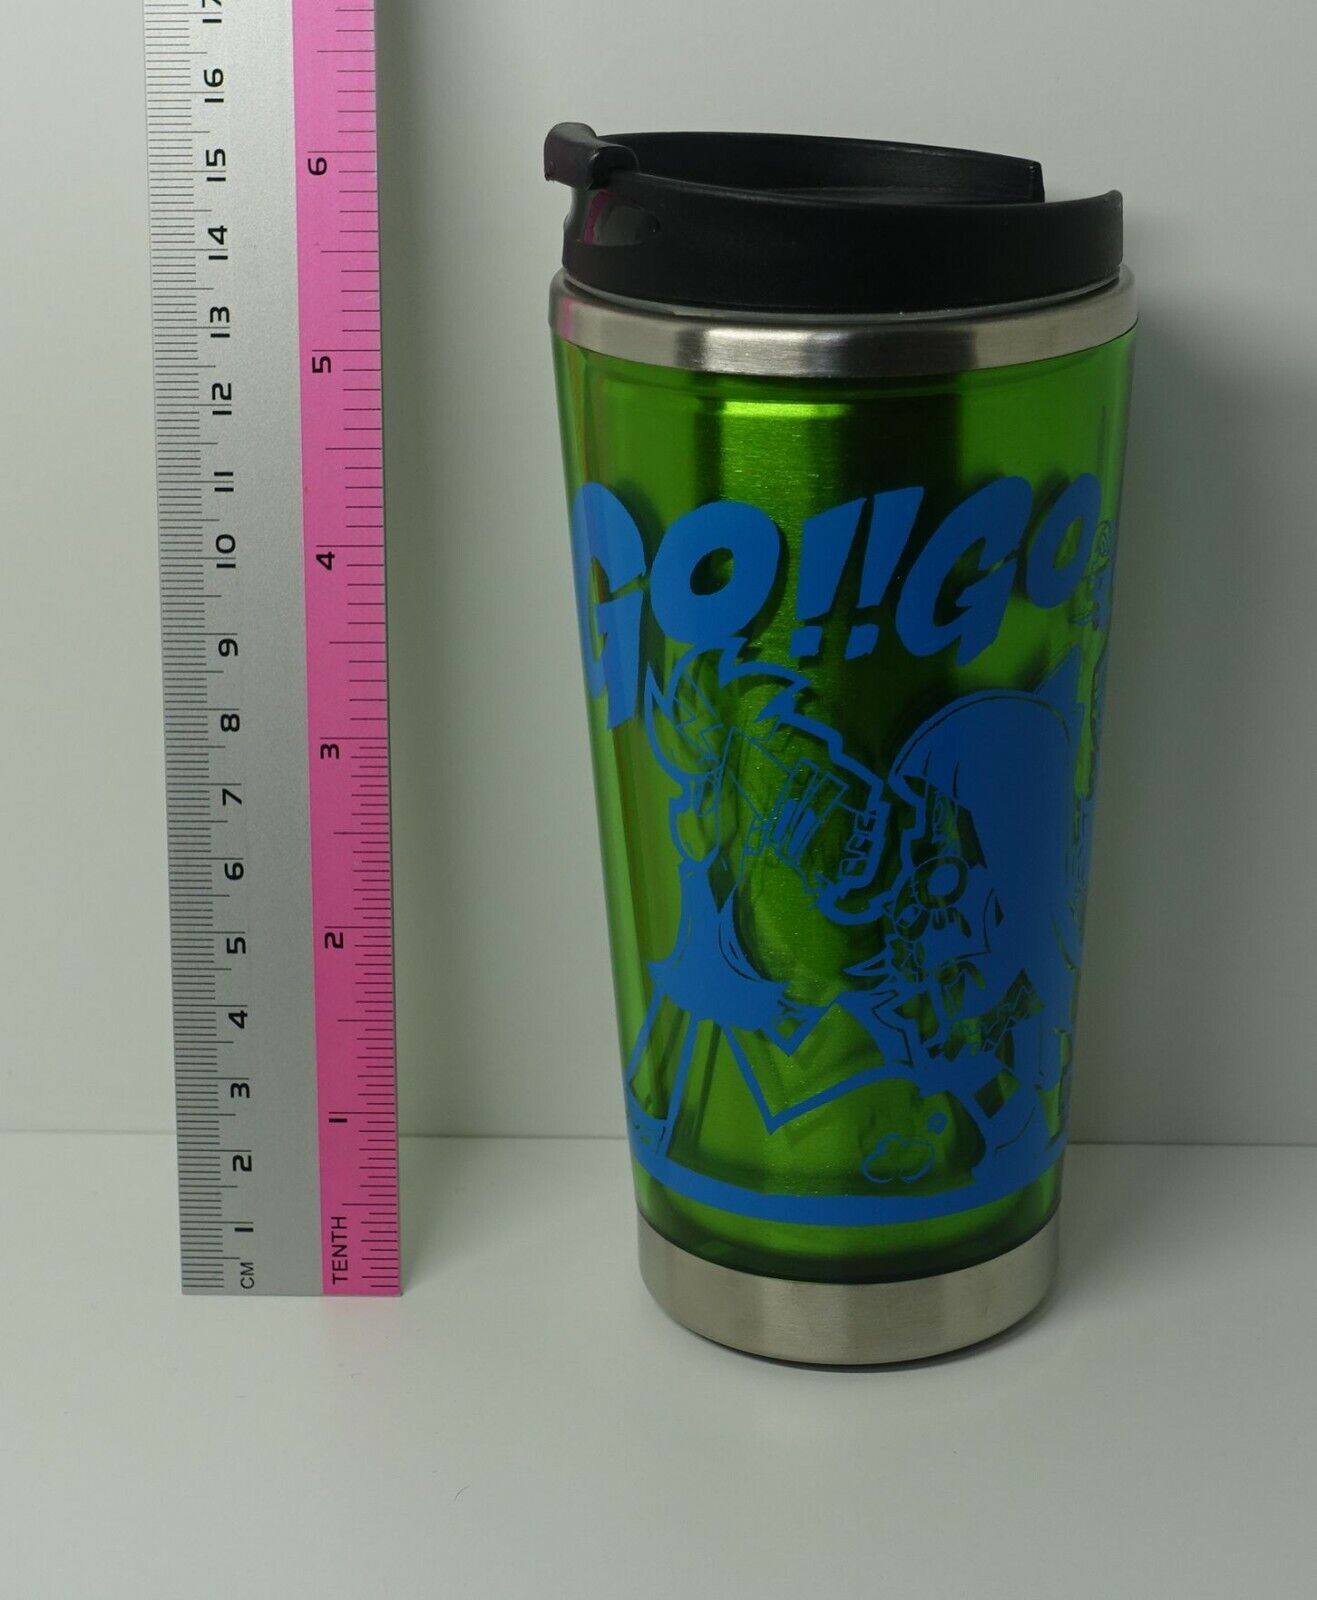 Panty & Stocking with Garterbelt Design Thermo Tumbler Glass 